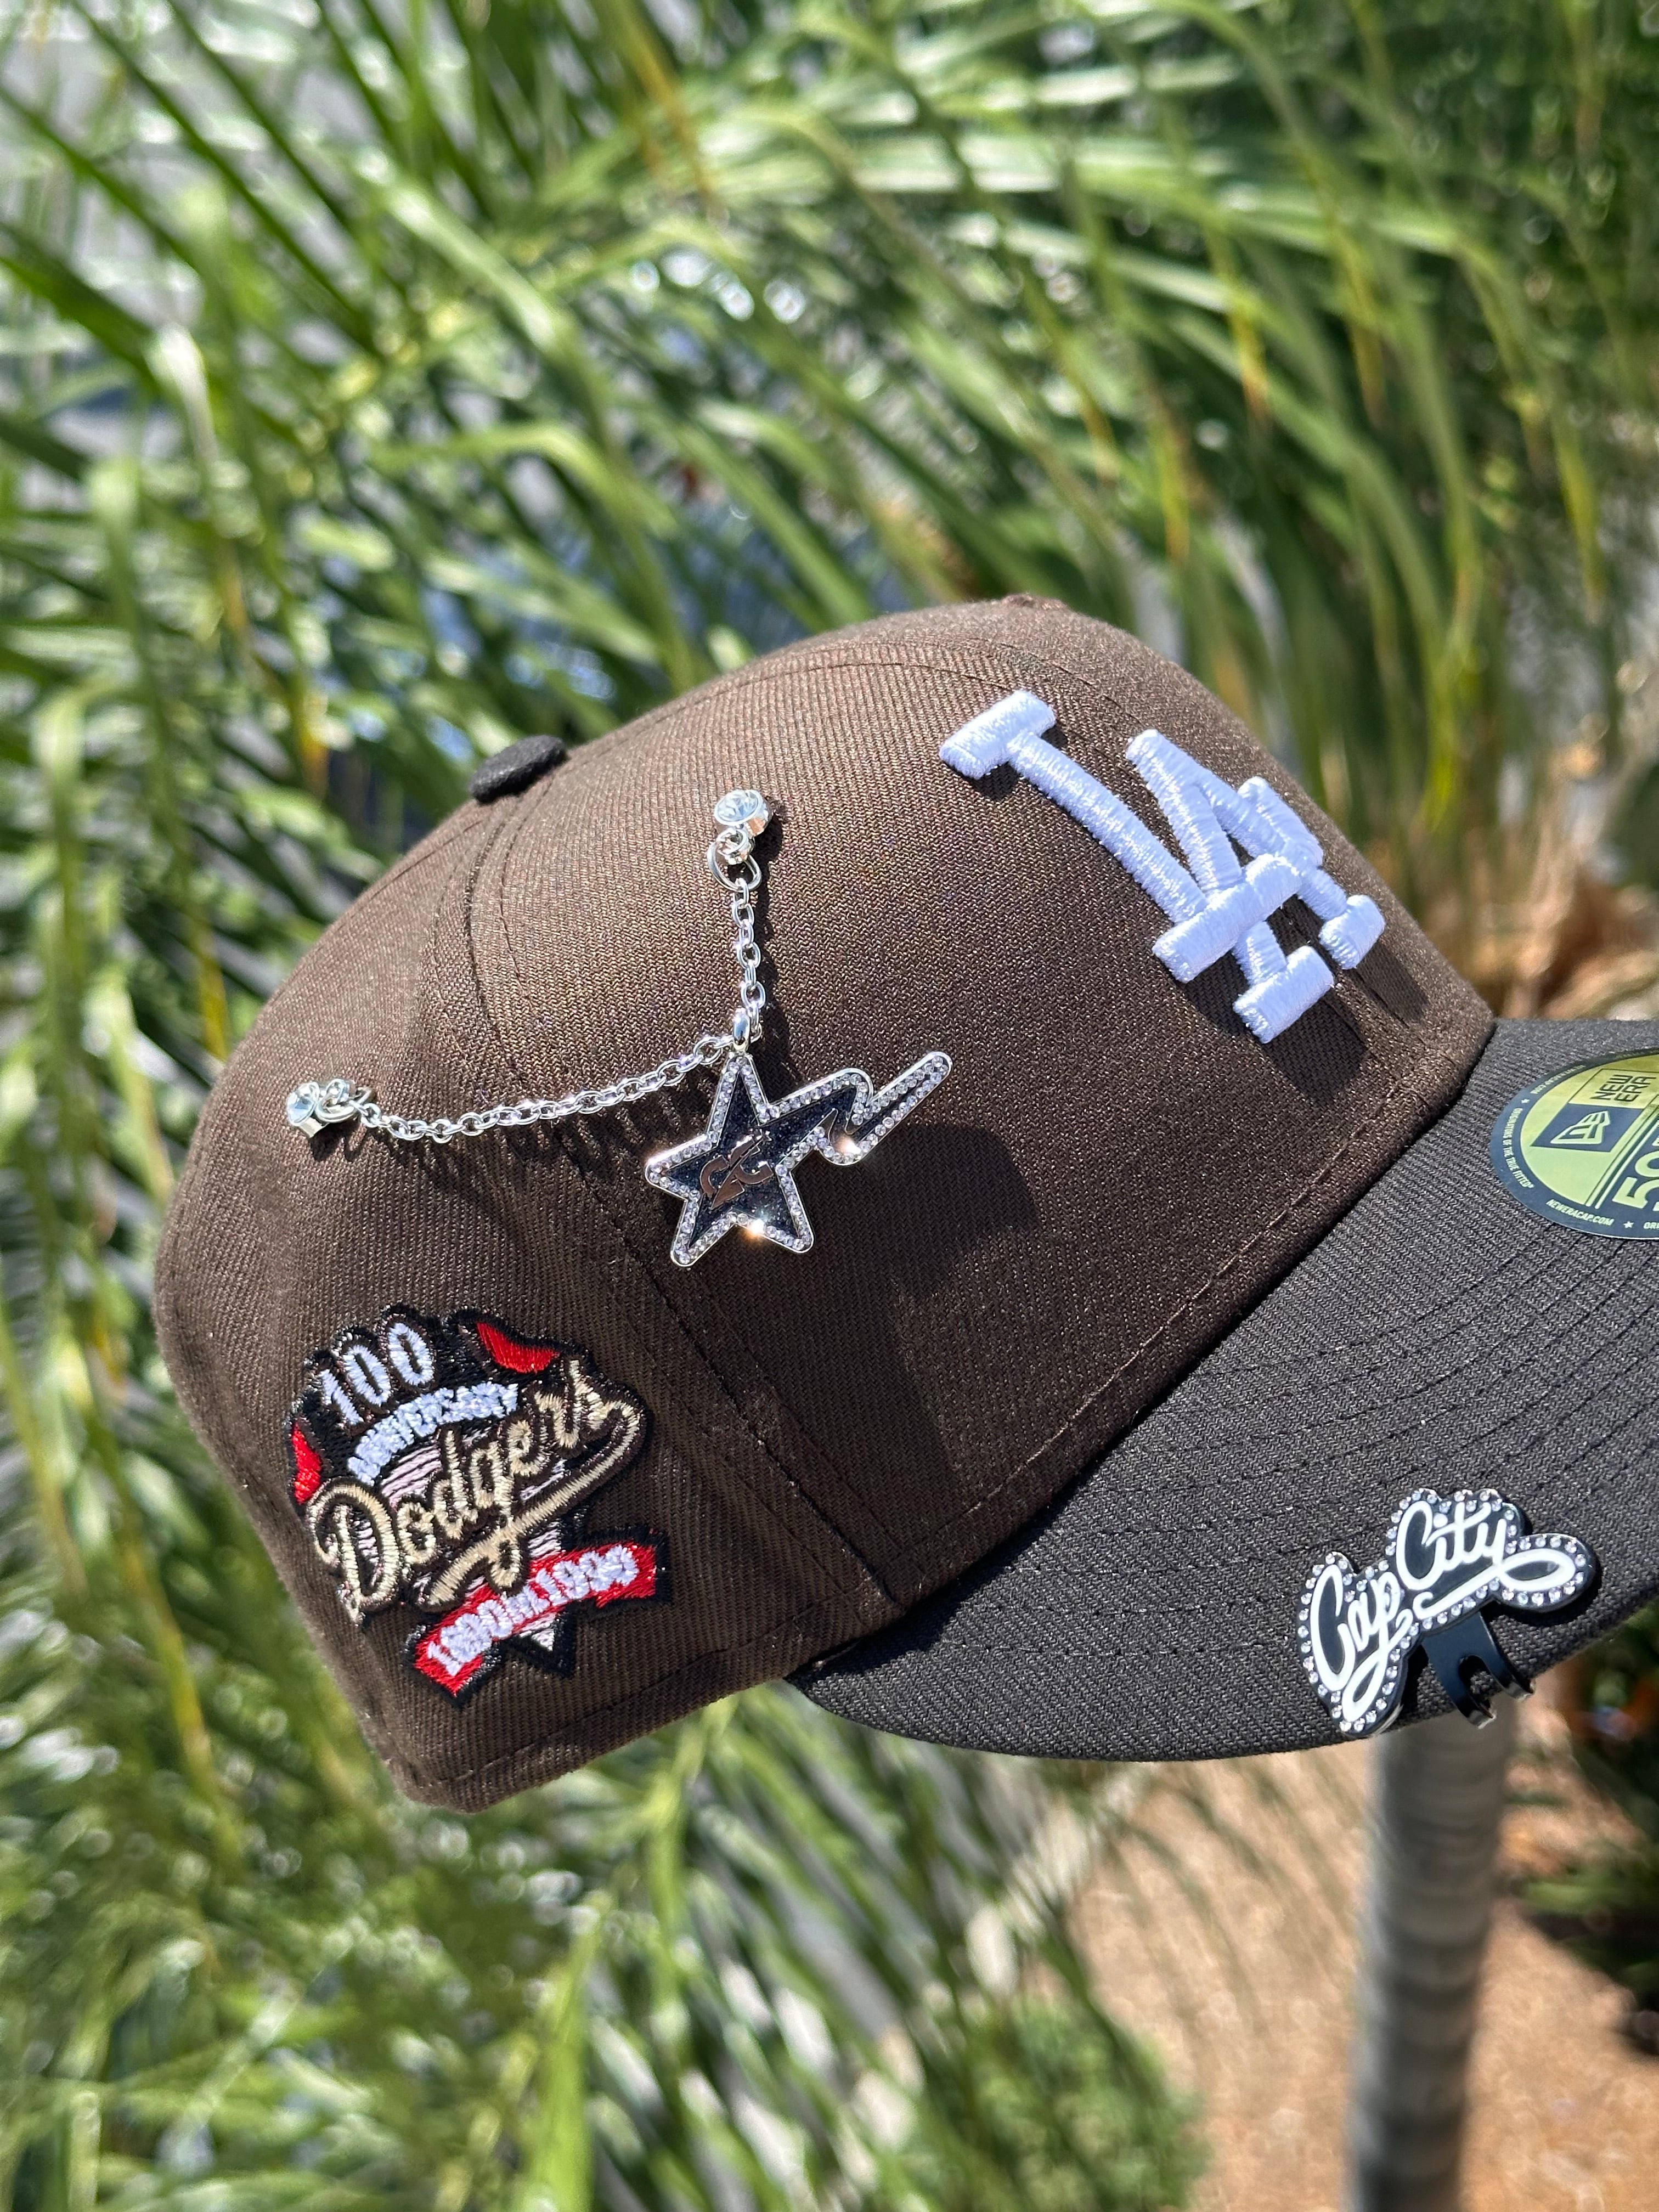 NEW ERA EXCLUSIVE 59FIFTY MOCHA/BLACK LOS ANGELES DODGERS W/ 100TH ANNIVERSARY PATCH